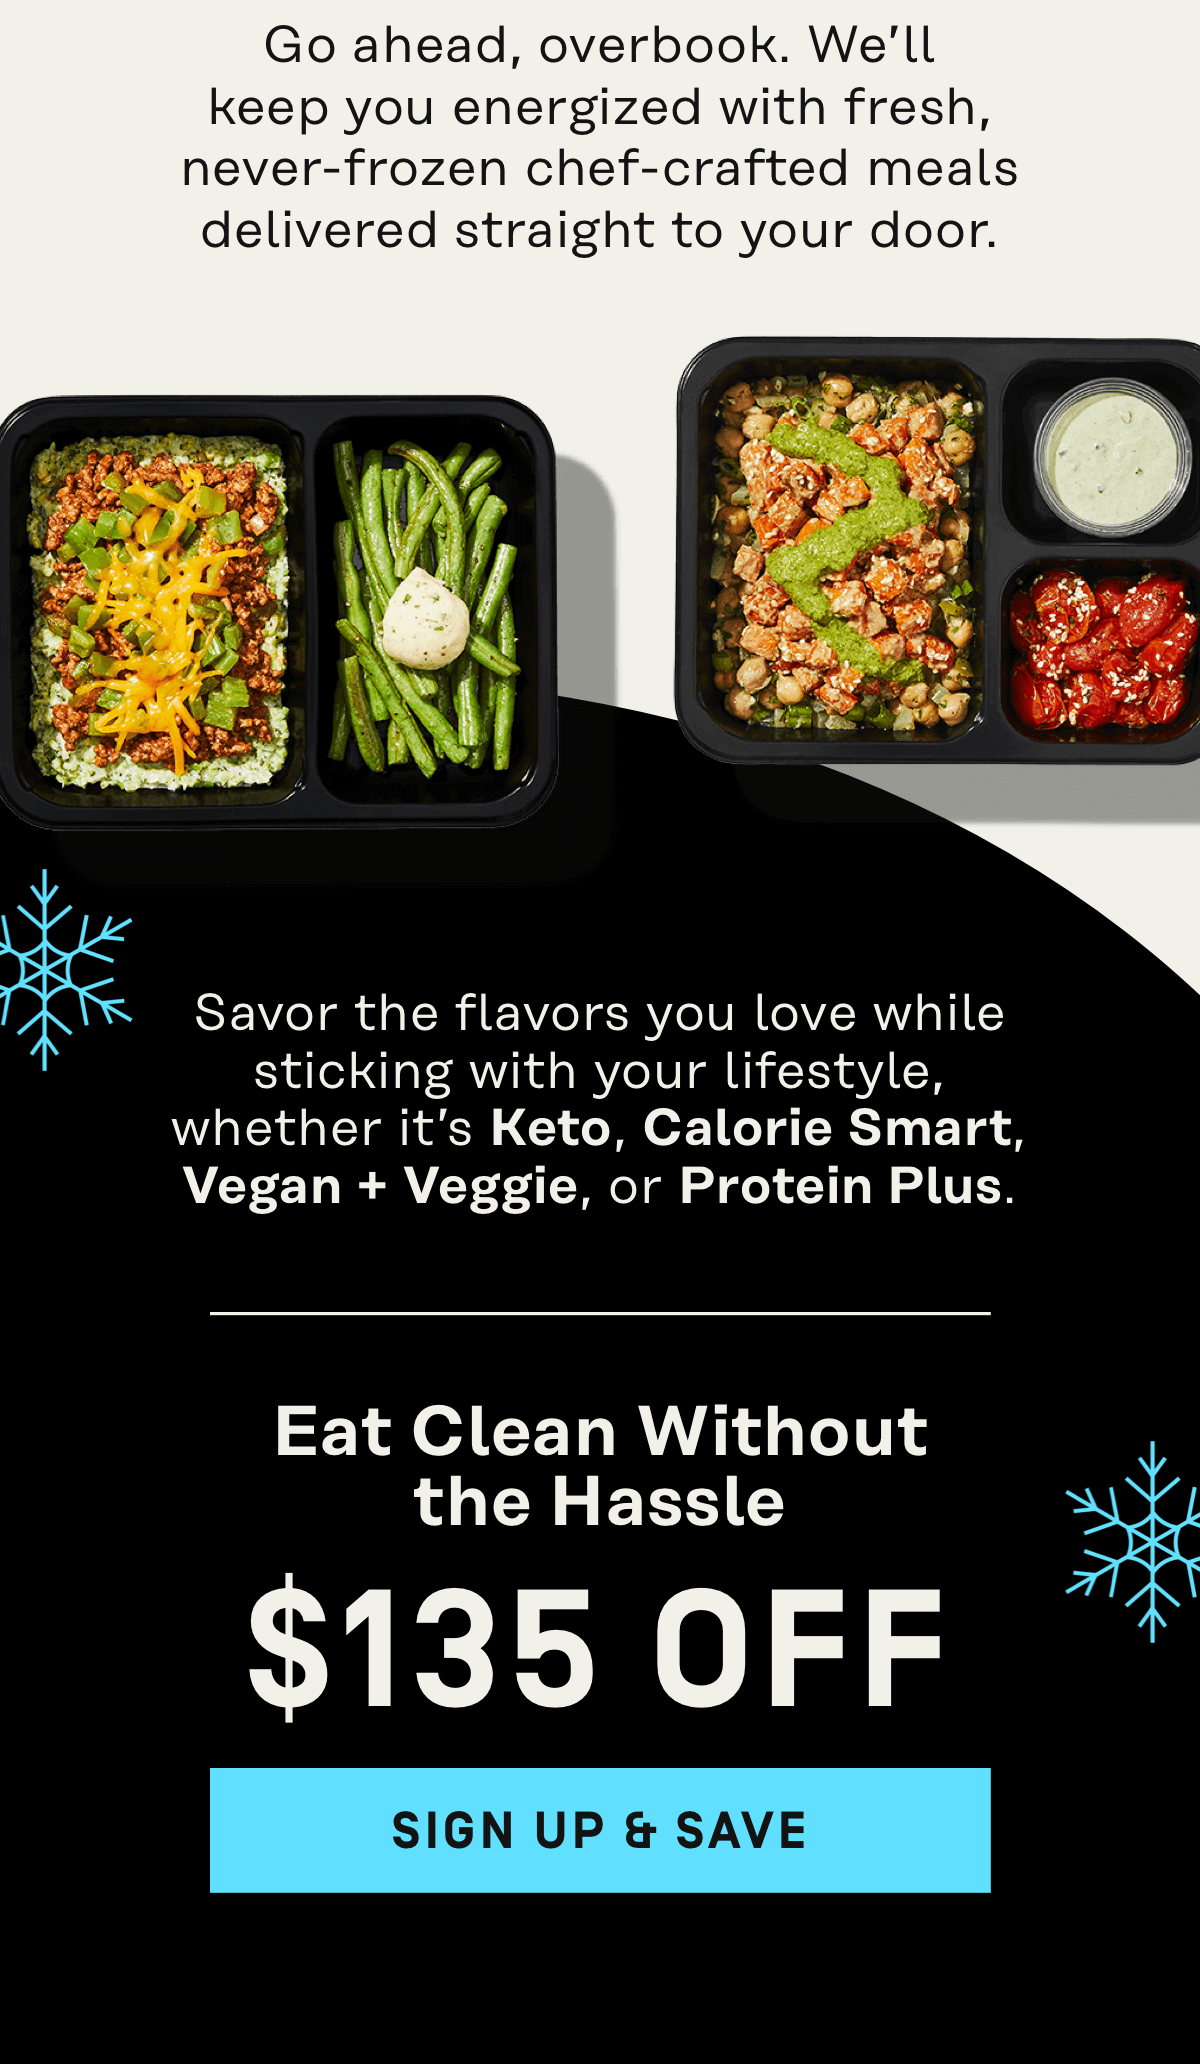 Eat clean without the hassle $135 OFF | Sign up & Save